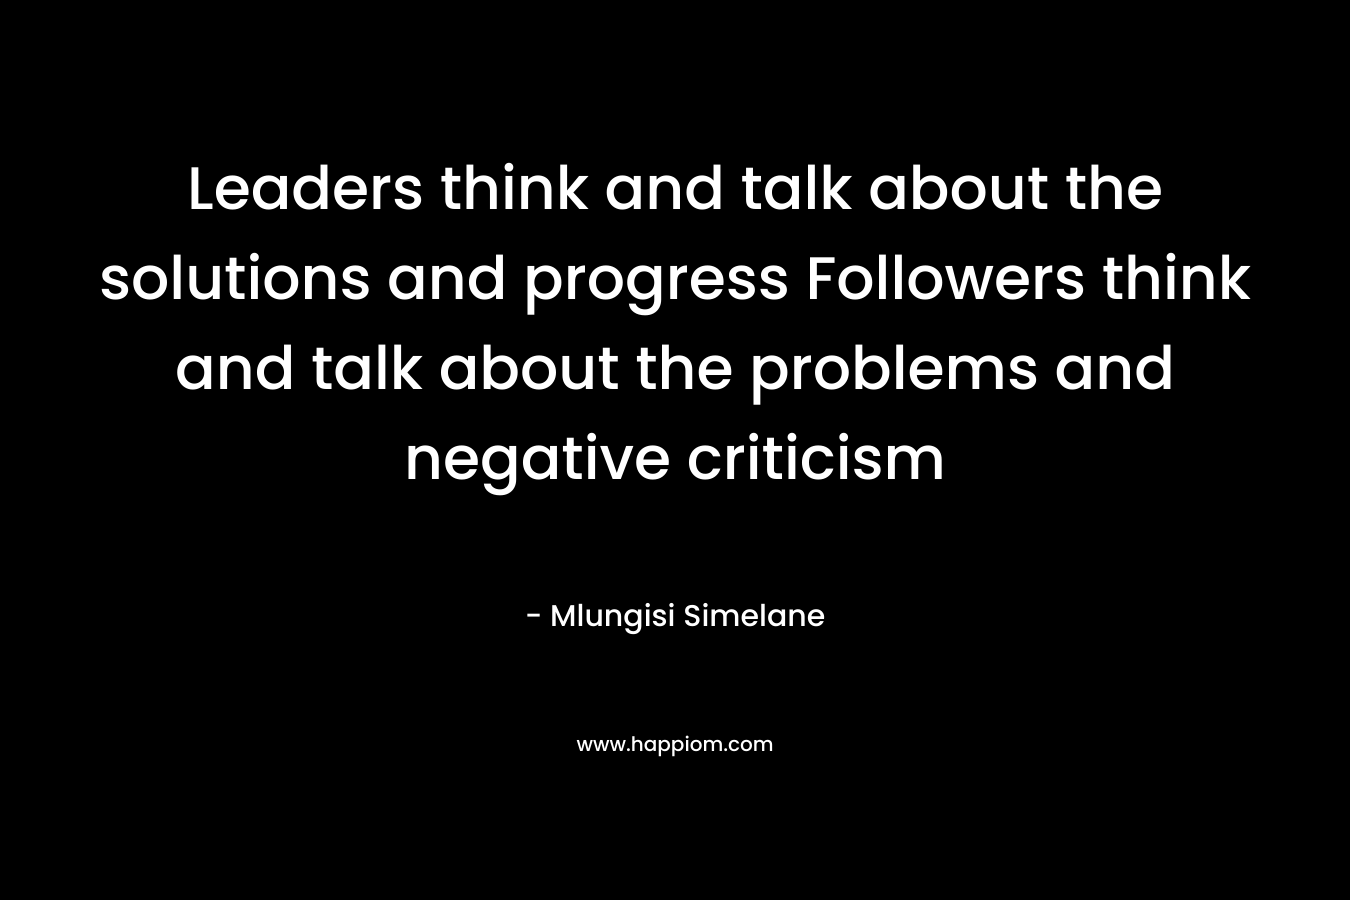 Leaders think and talk about the solutions and progress Followers think and talk about the problems and negative criticism